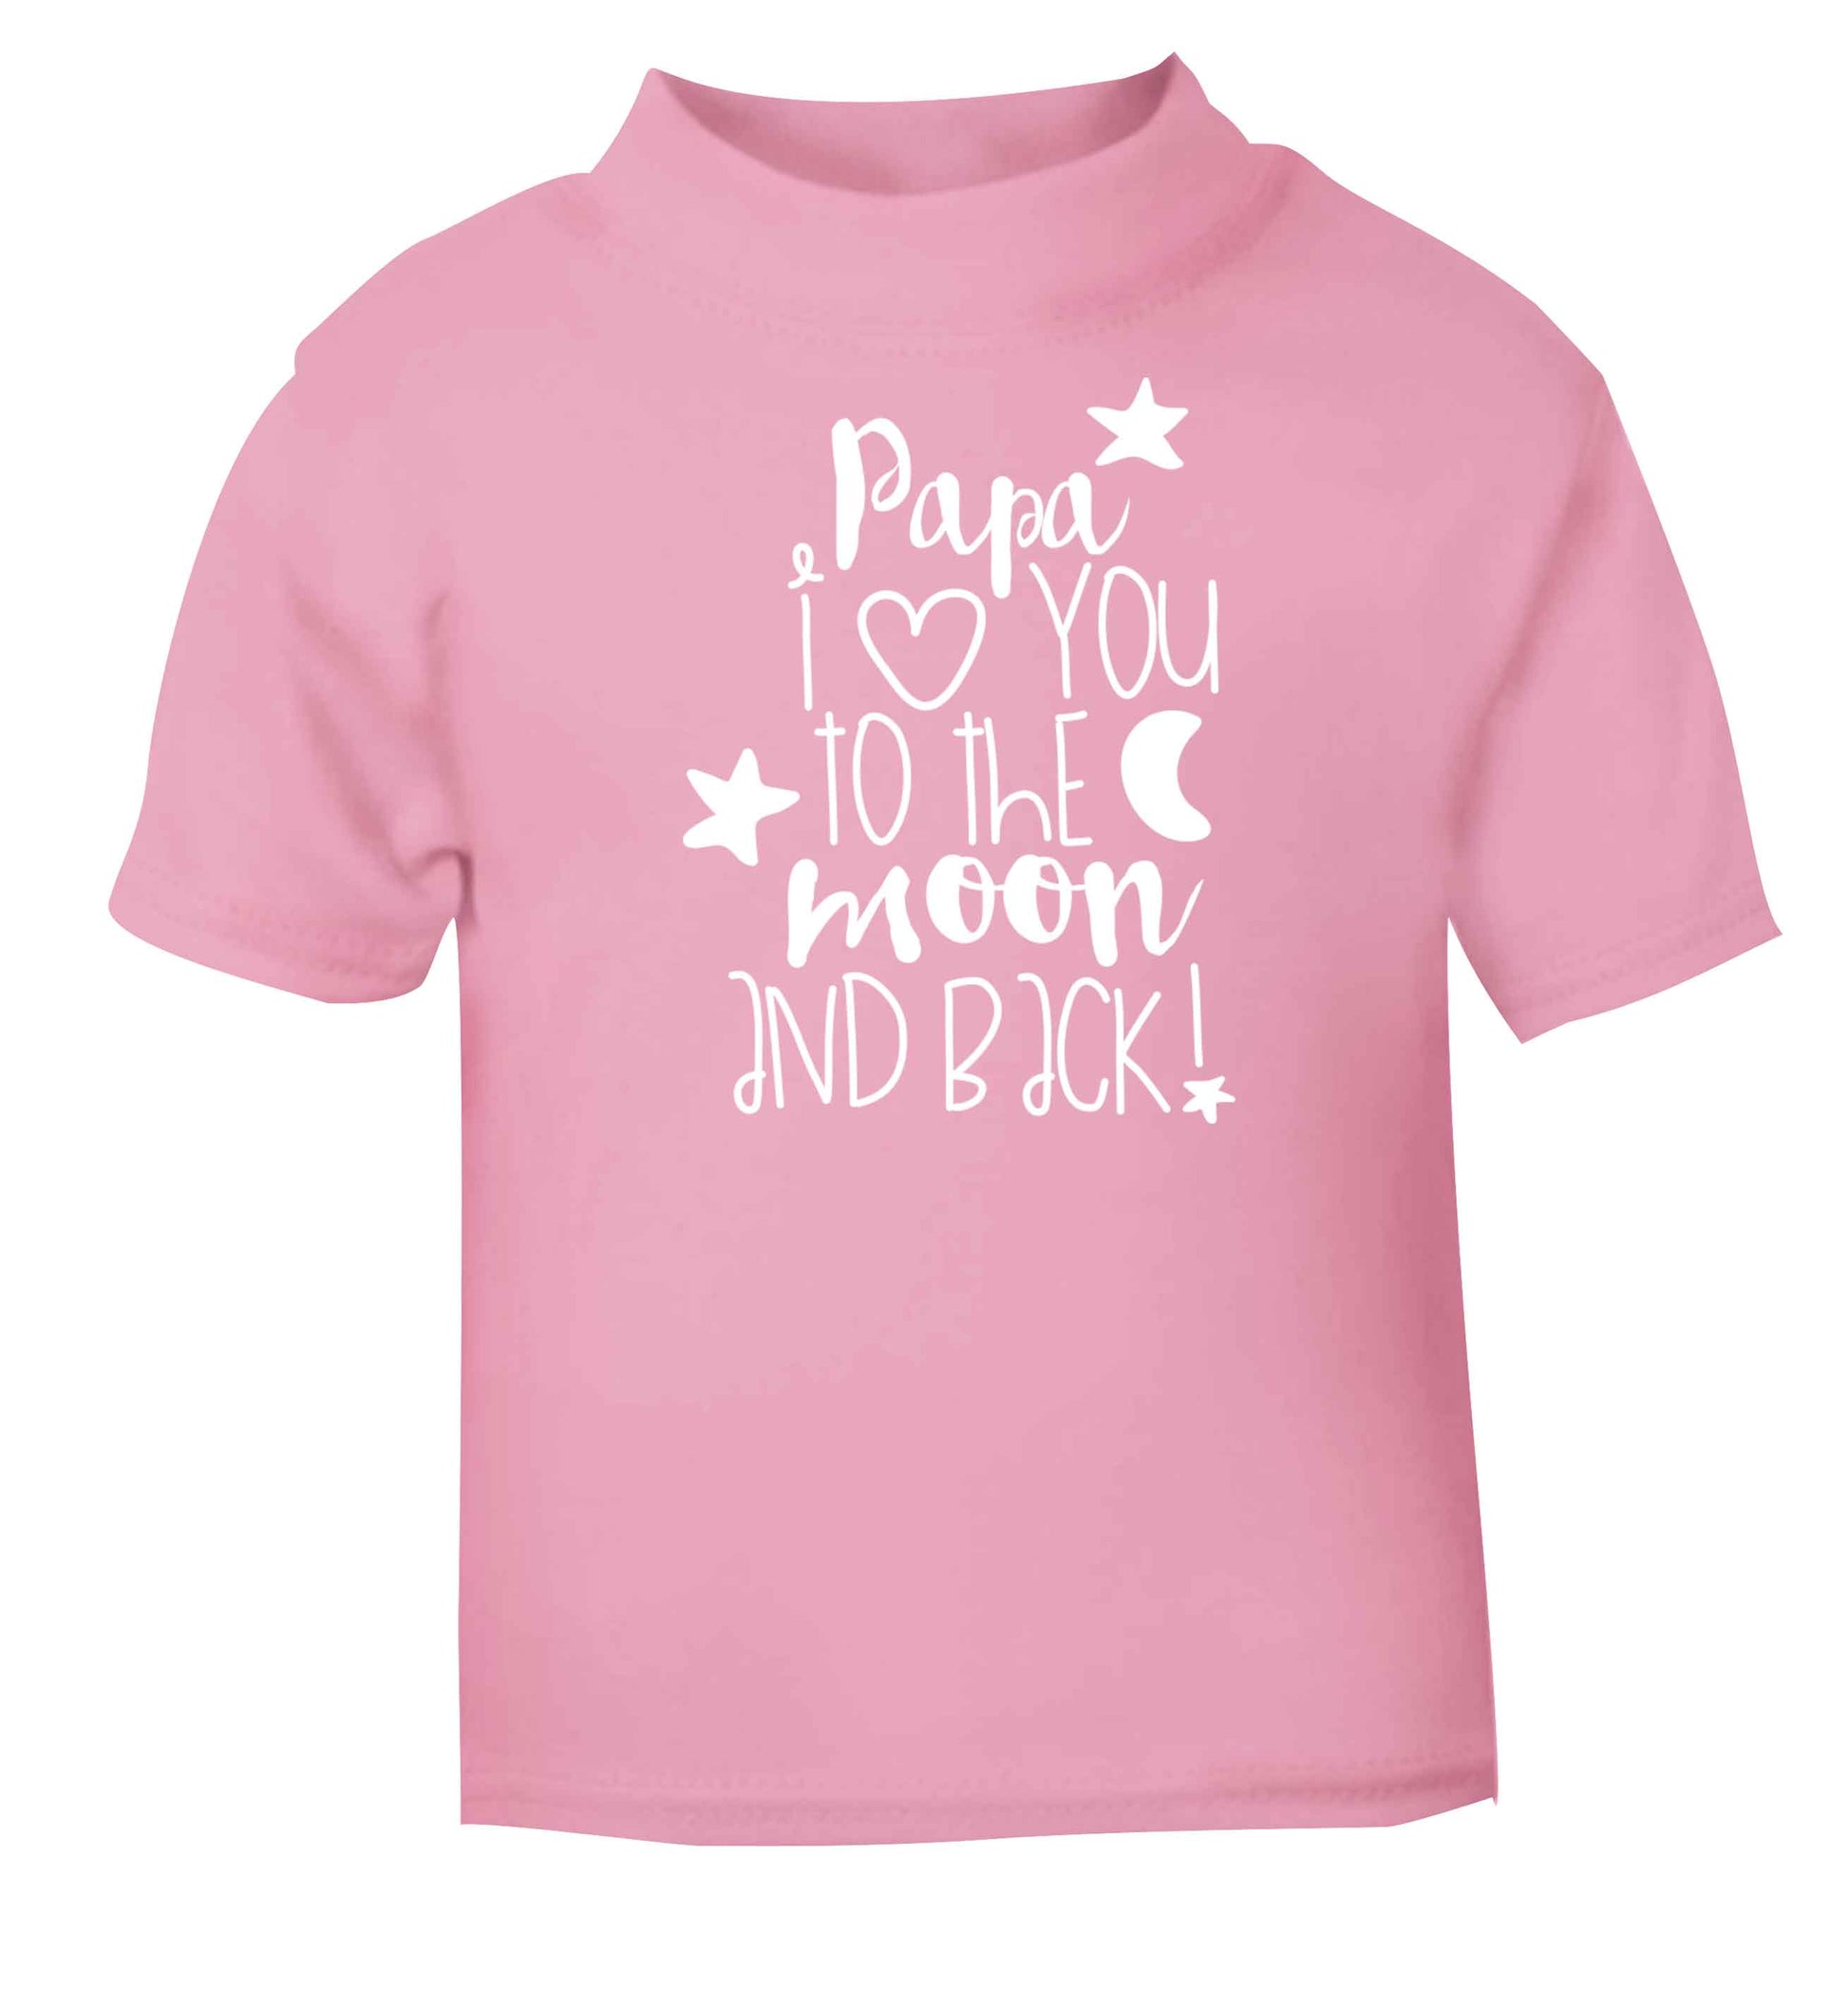 Papa I love you to the moon and back light pink baby toddler Tshirt 2 Years